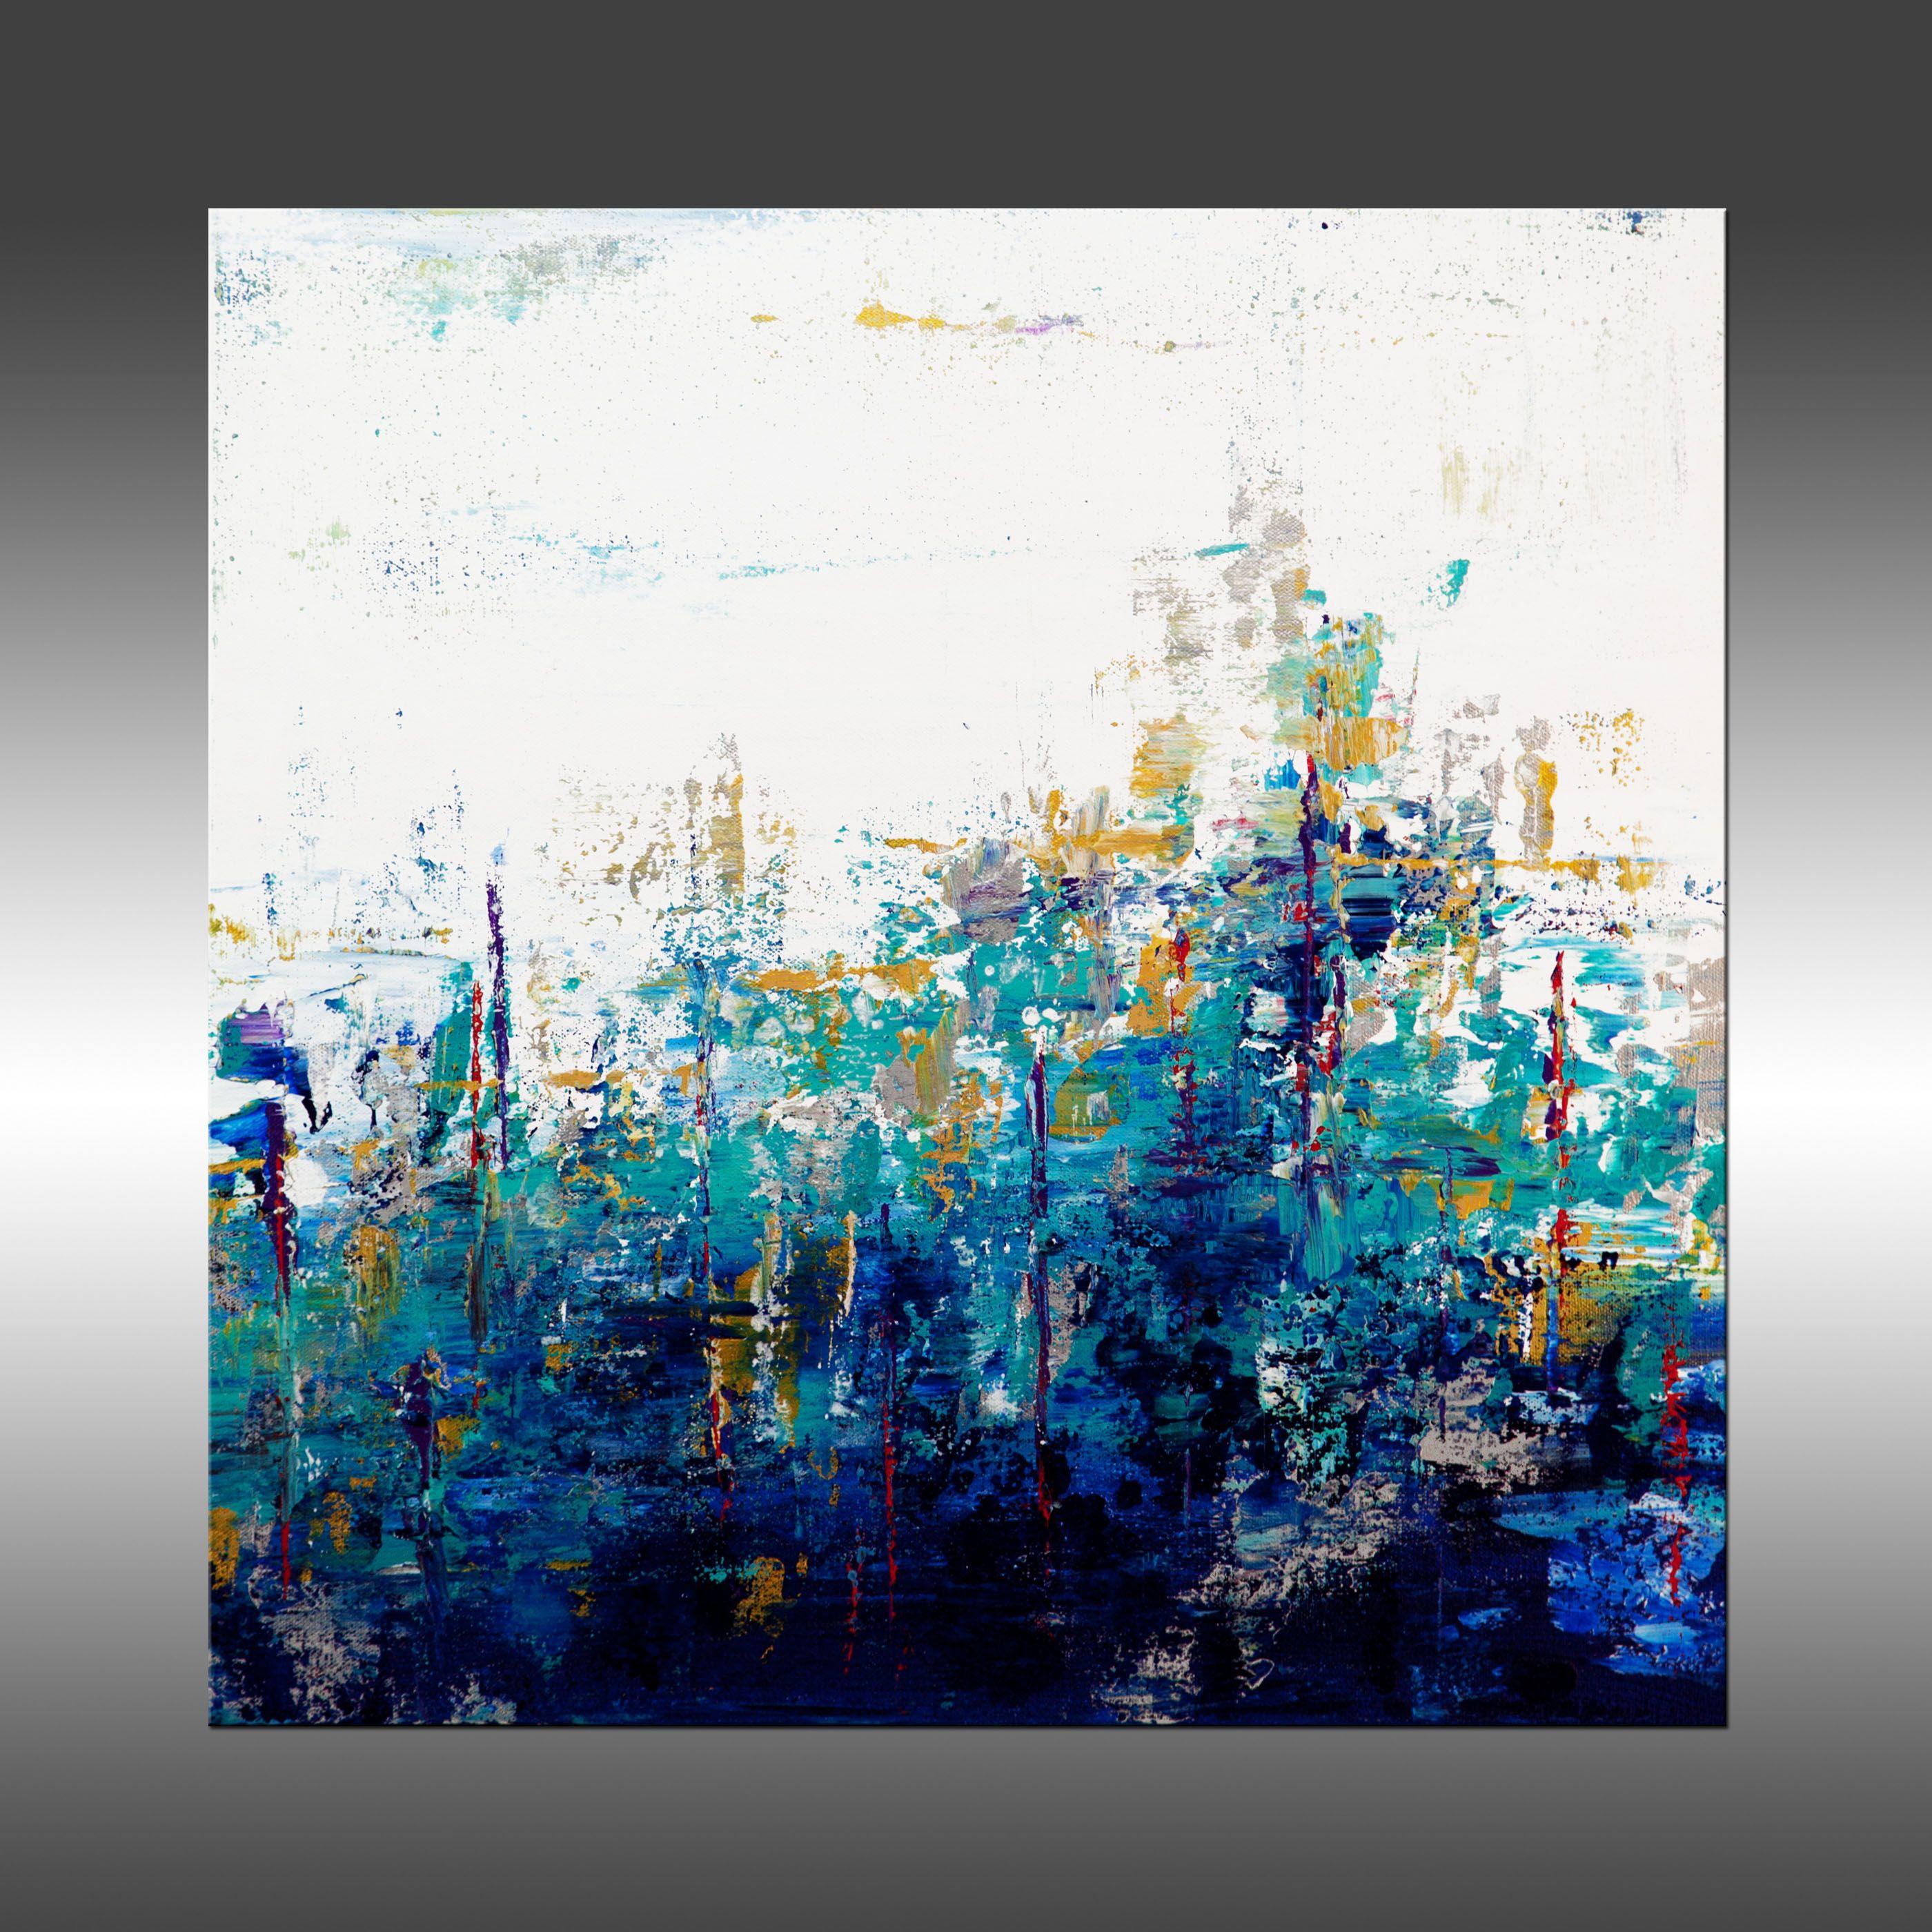 Blue Lake 12 is an original painting, created with acrylic paint on gallery-wrapped canvas. It has a width of 18 inches and a height of 18 inches with a depth of 1.5 inches (18x18x1.5).    The colors used in the painting are white, blue, teal,